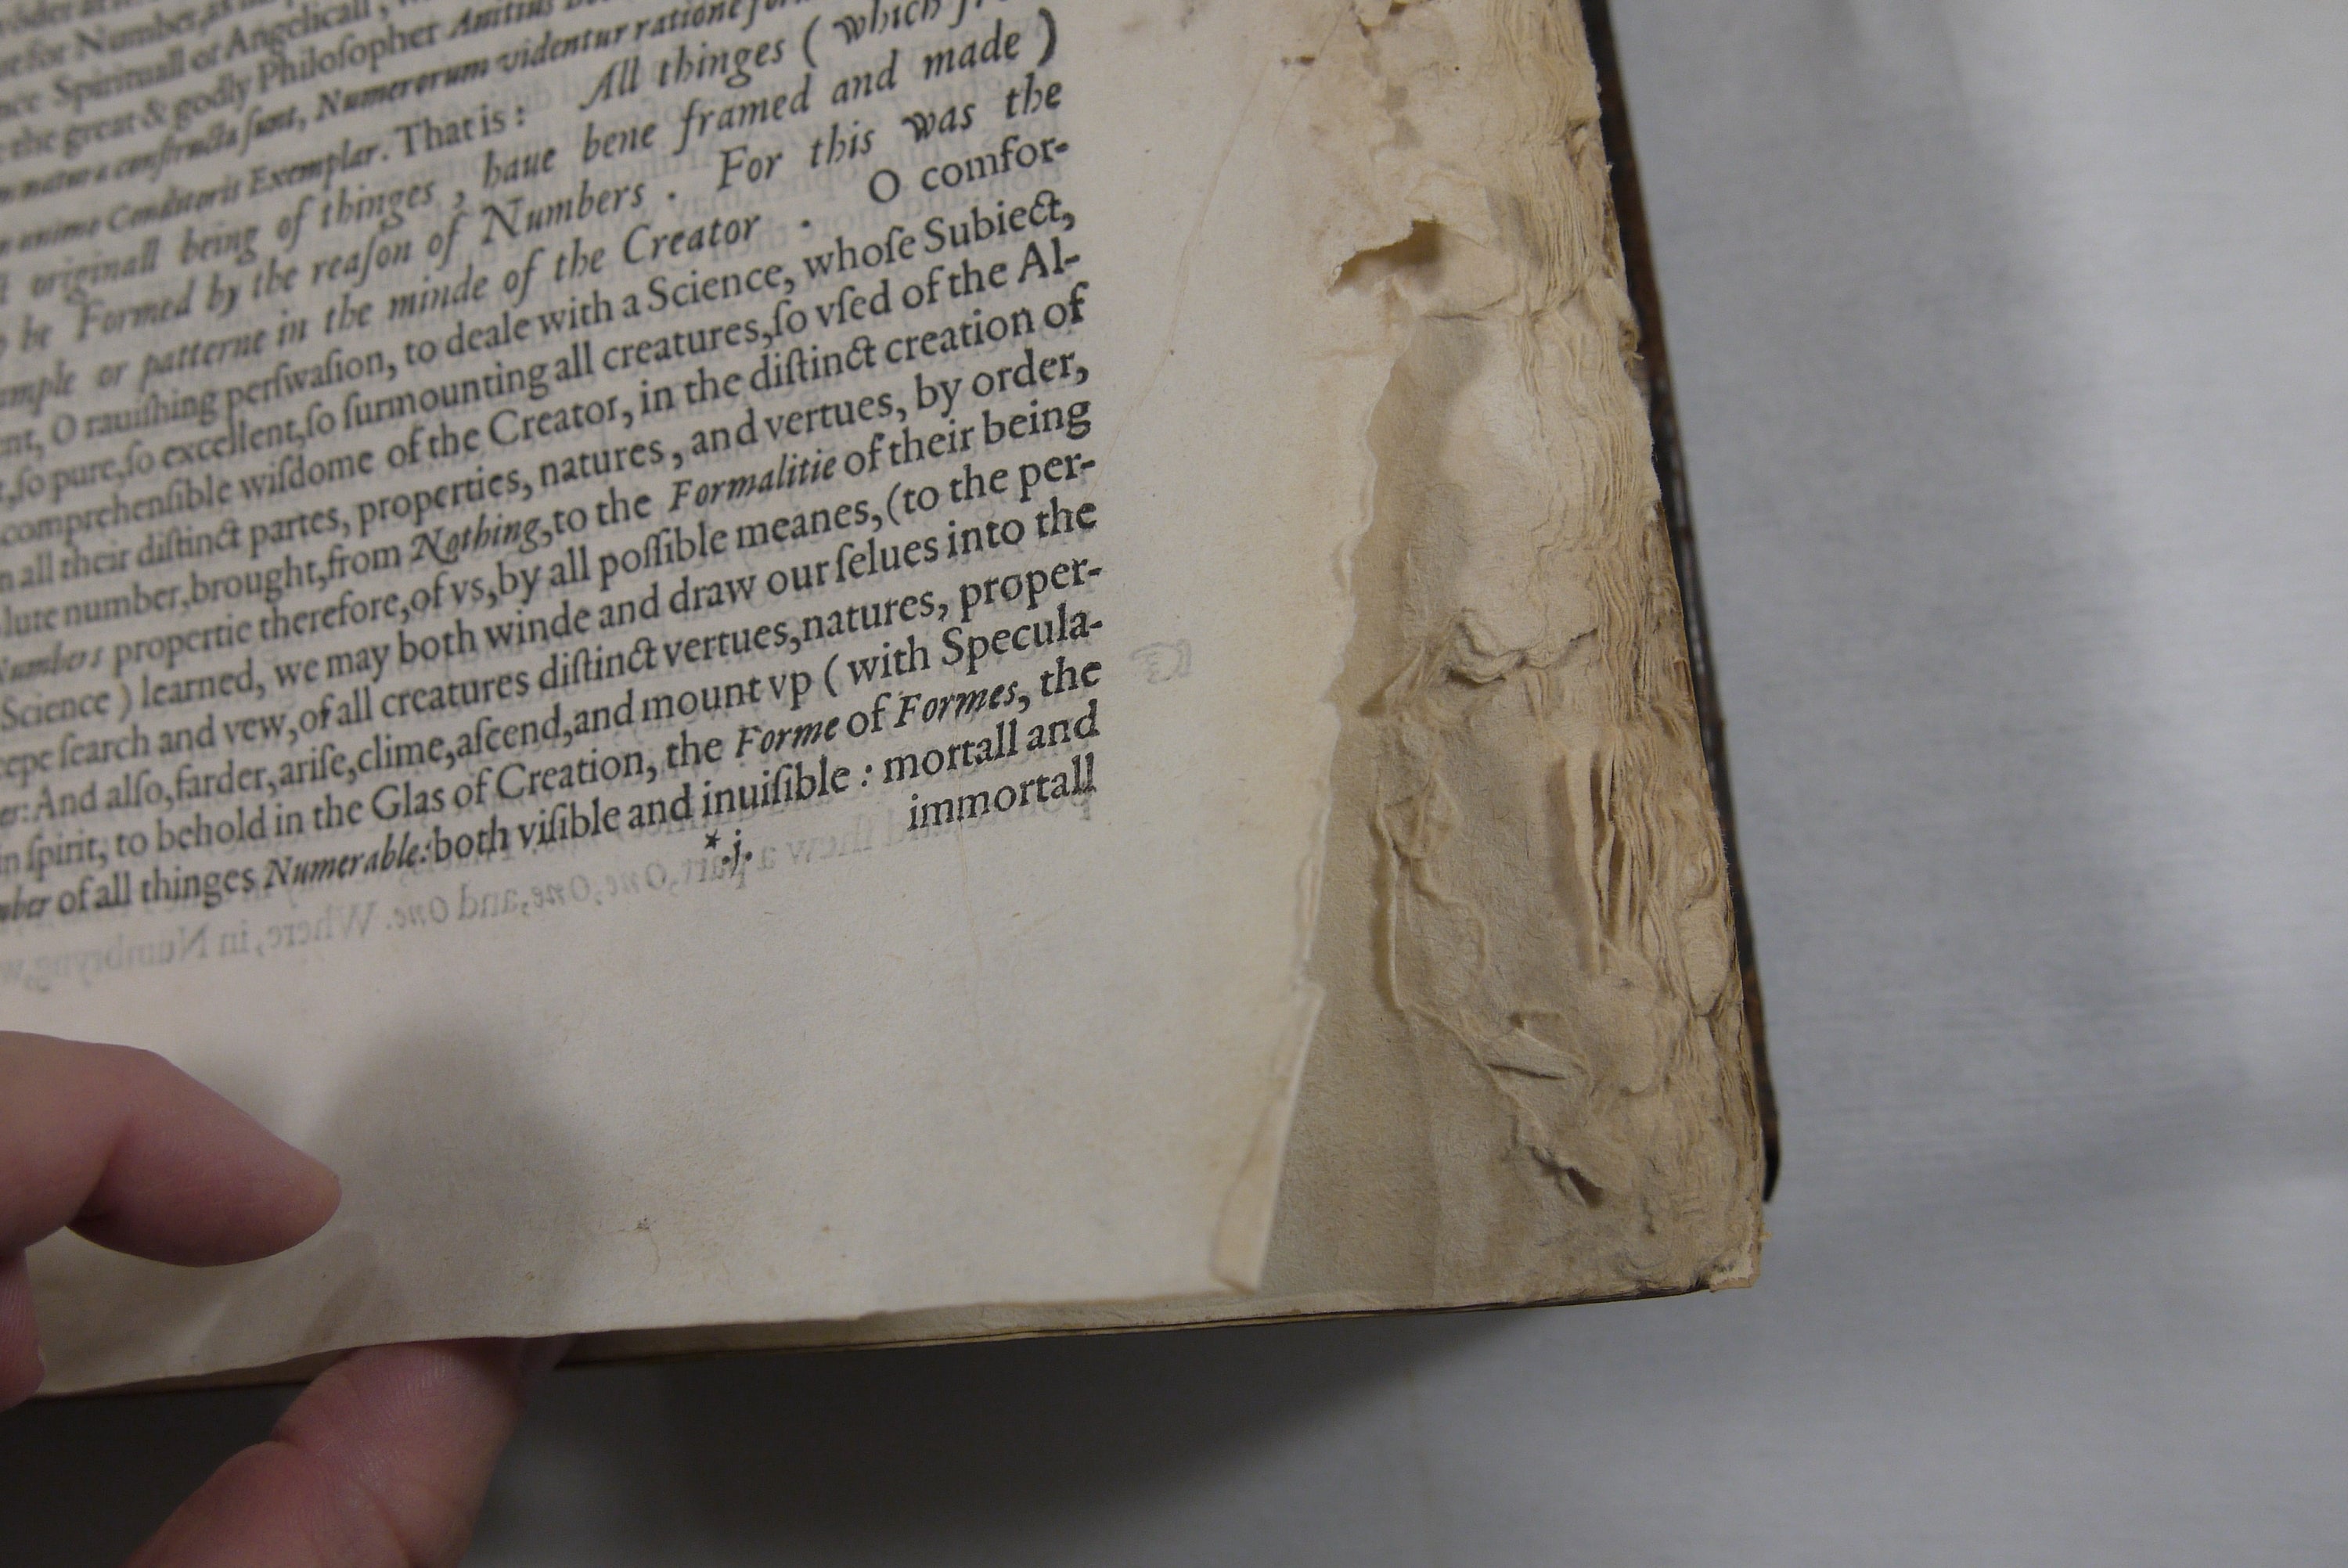 Damage to pages